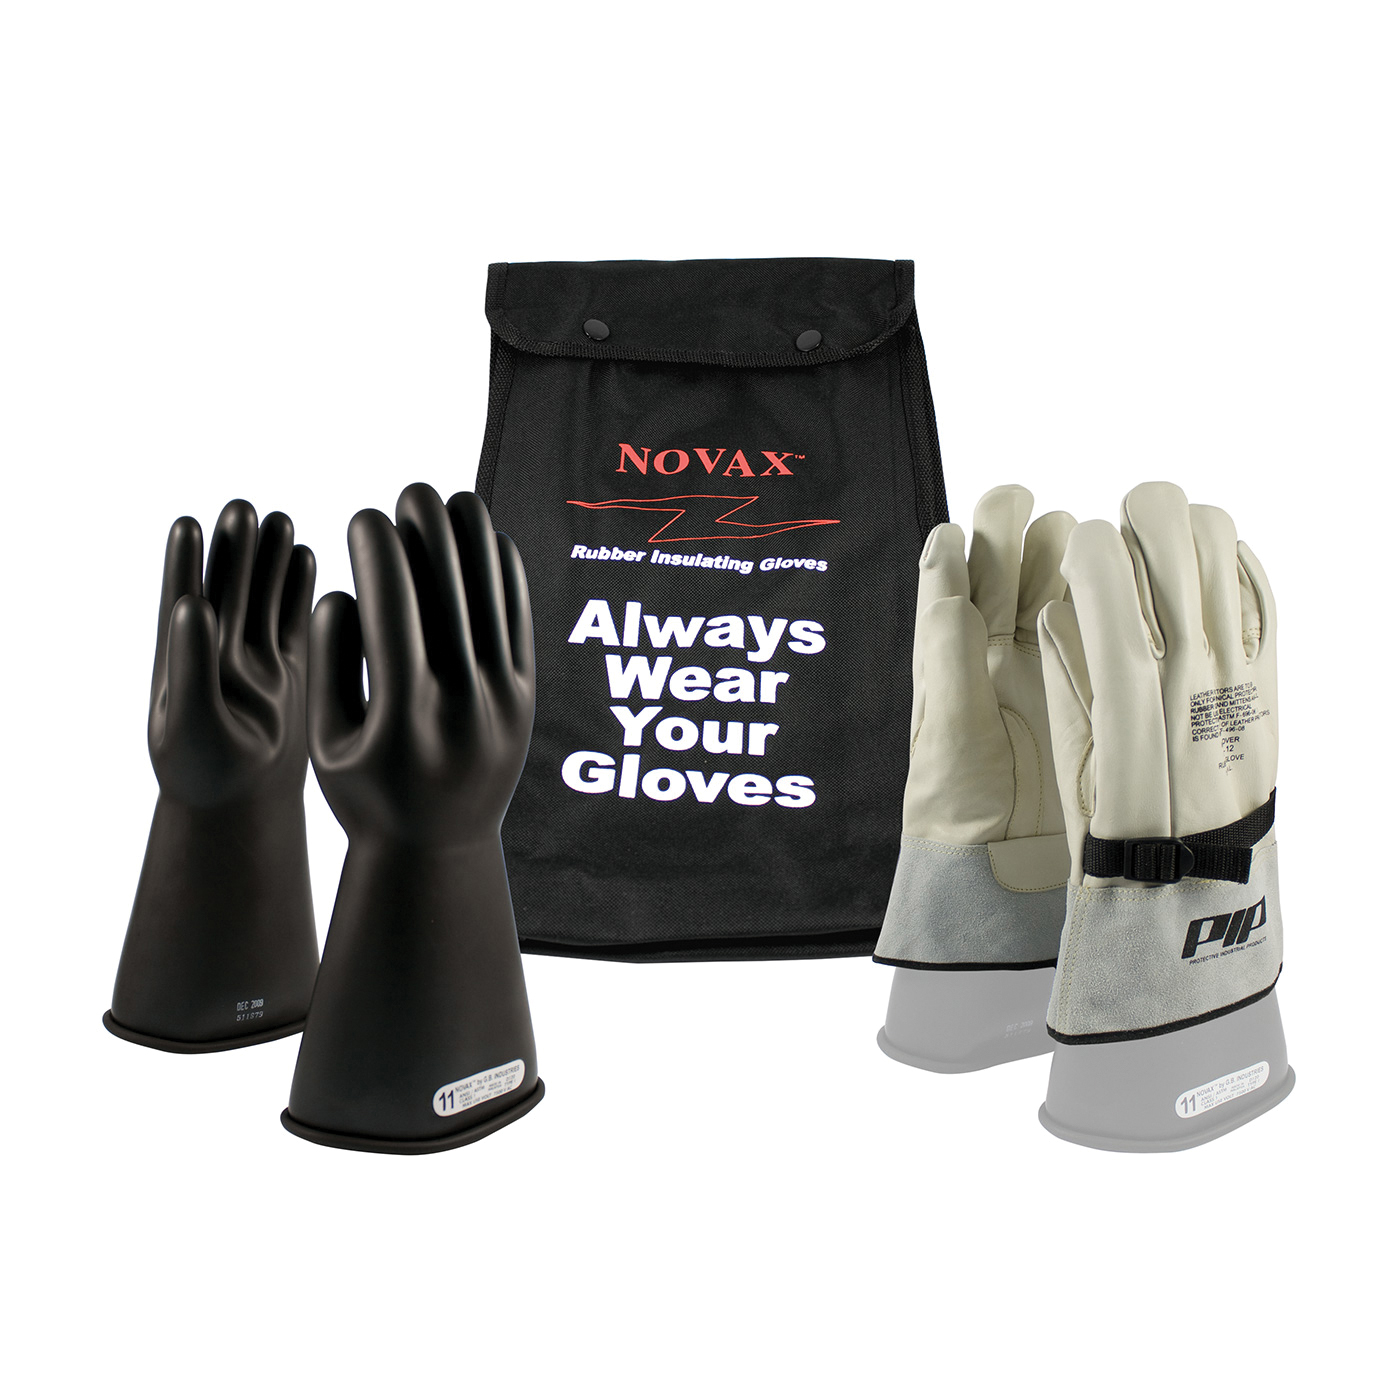 Novax® 150-SK-1/7-KIT Insulating Unisex Electrical Safety Gloves Kit, SZ 7, Cowhide Leather/Natural Rubber, Black/Natural, 14 in L, ASTM Class: Class 1, 7500 VAC, 11250 VDC Max Use Voltage